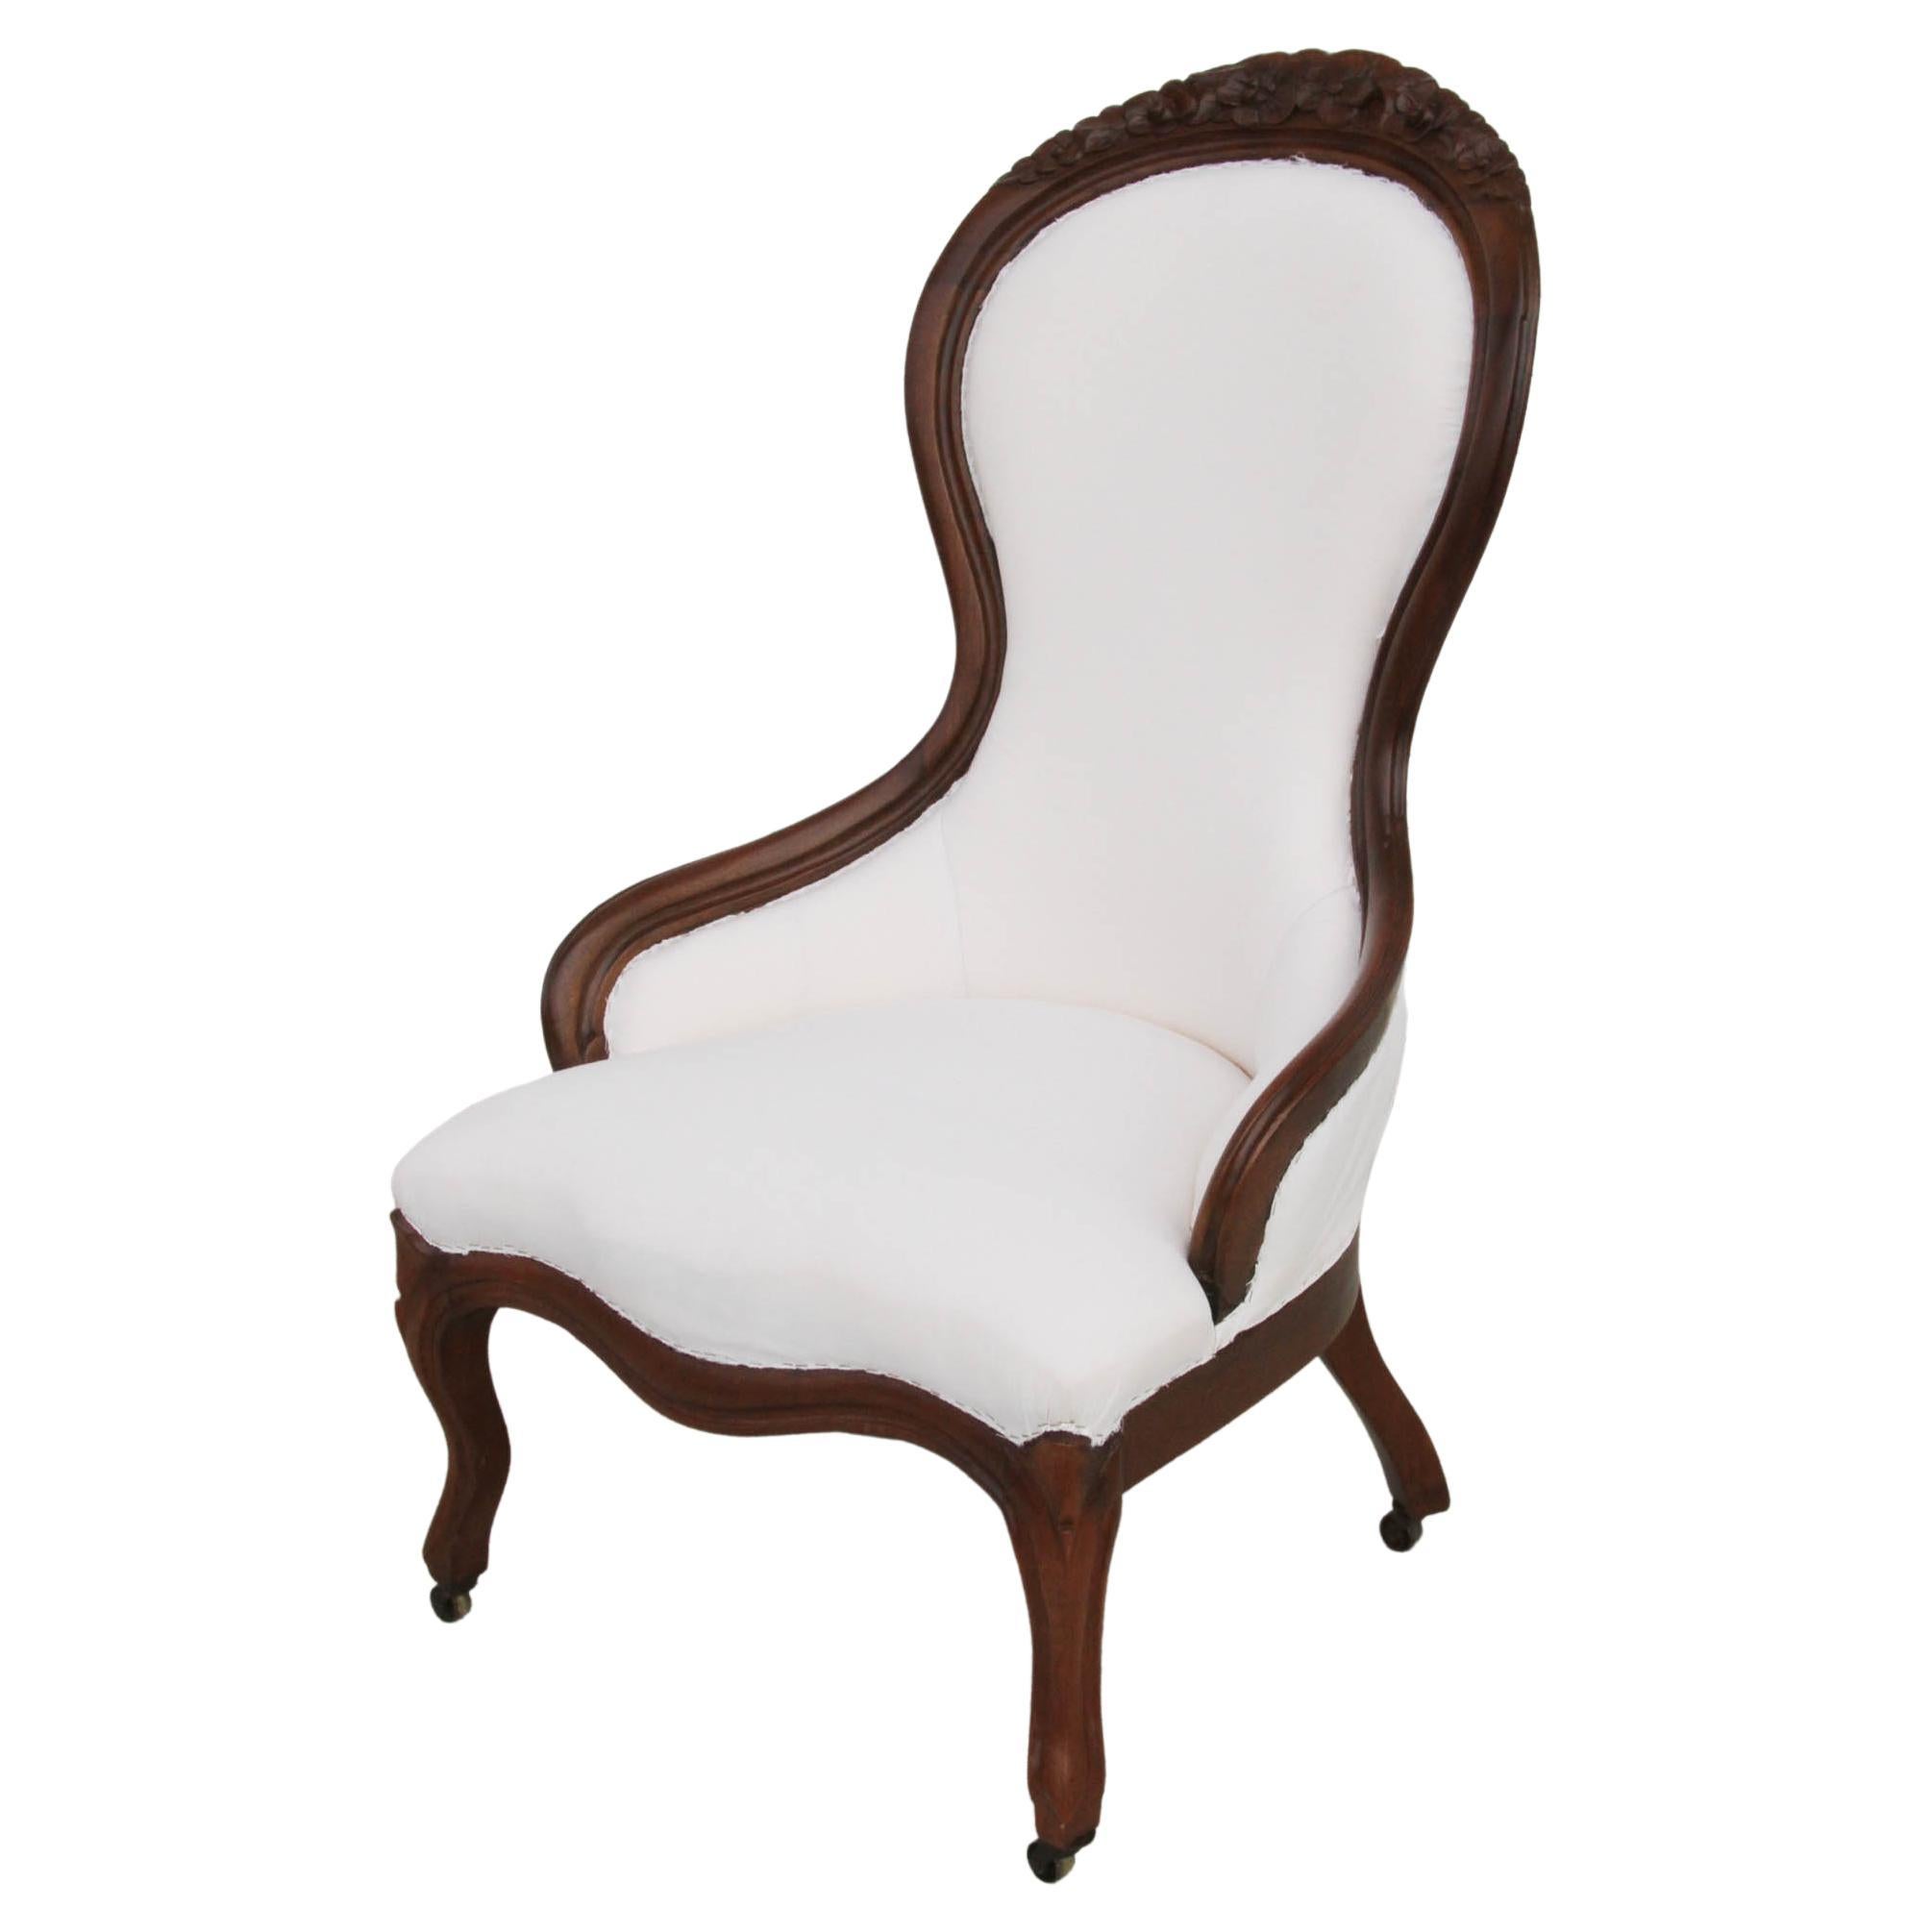 Victorian Style Spoon Back Parlor Lounge Chair For Sale